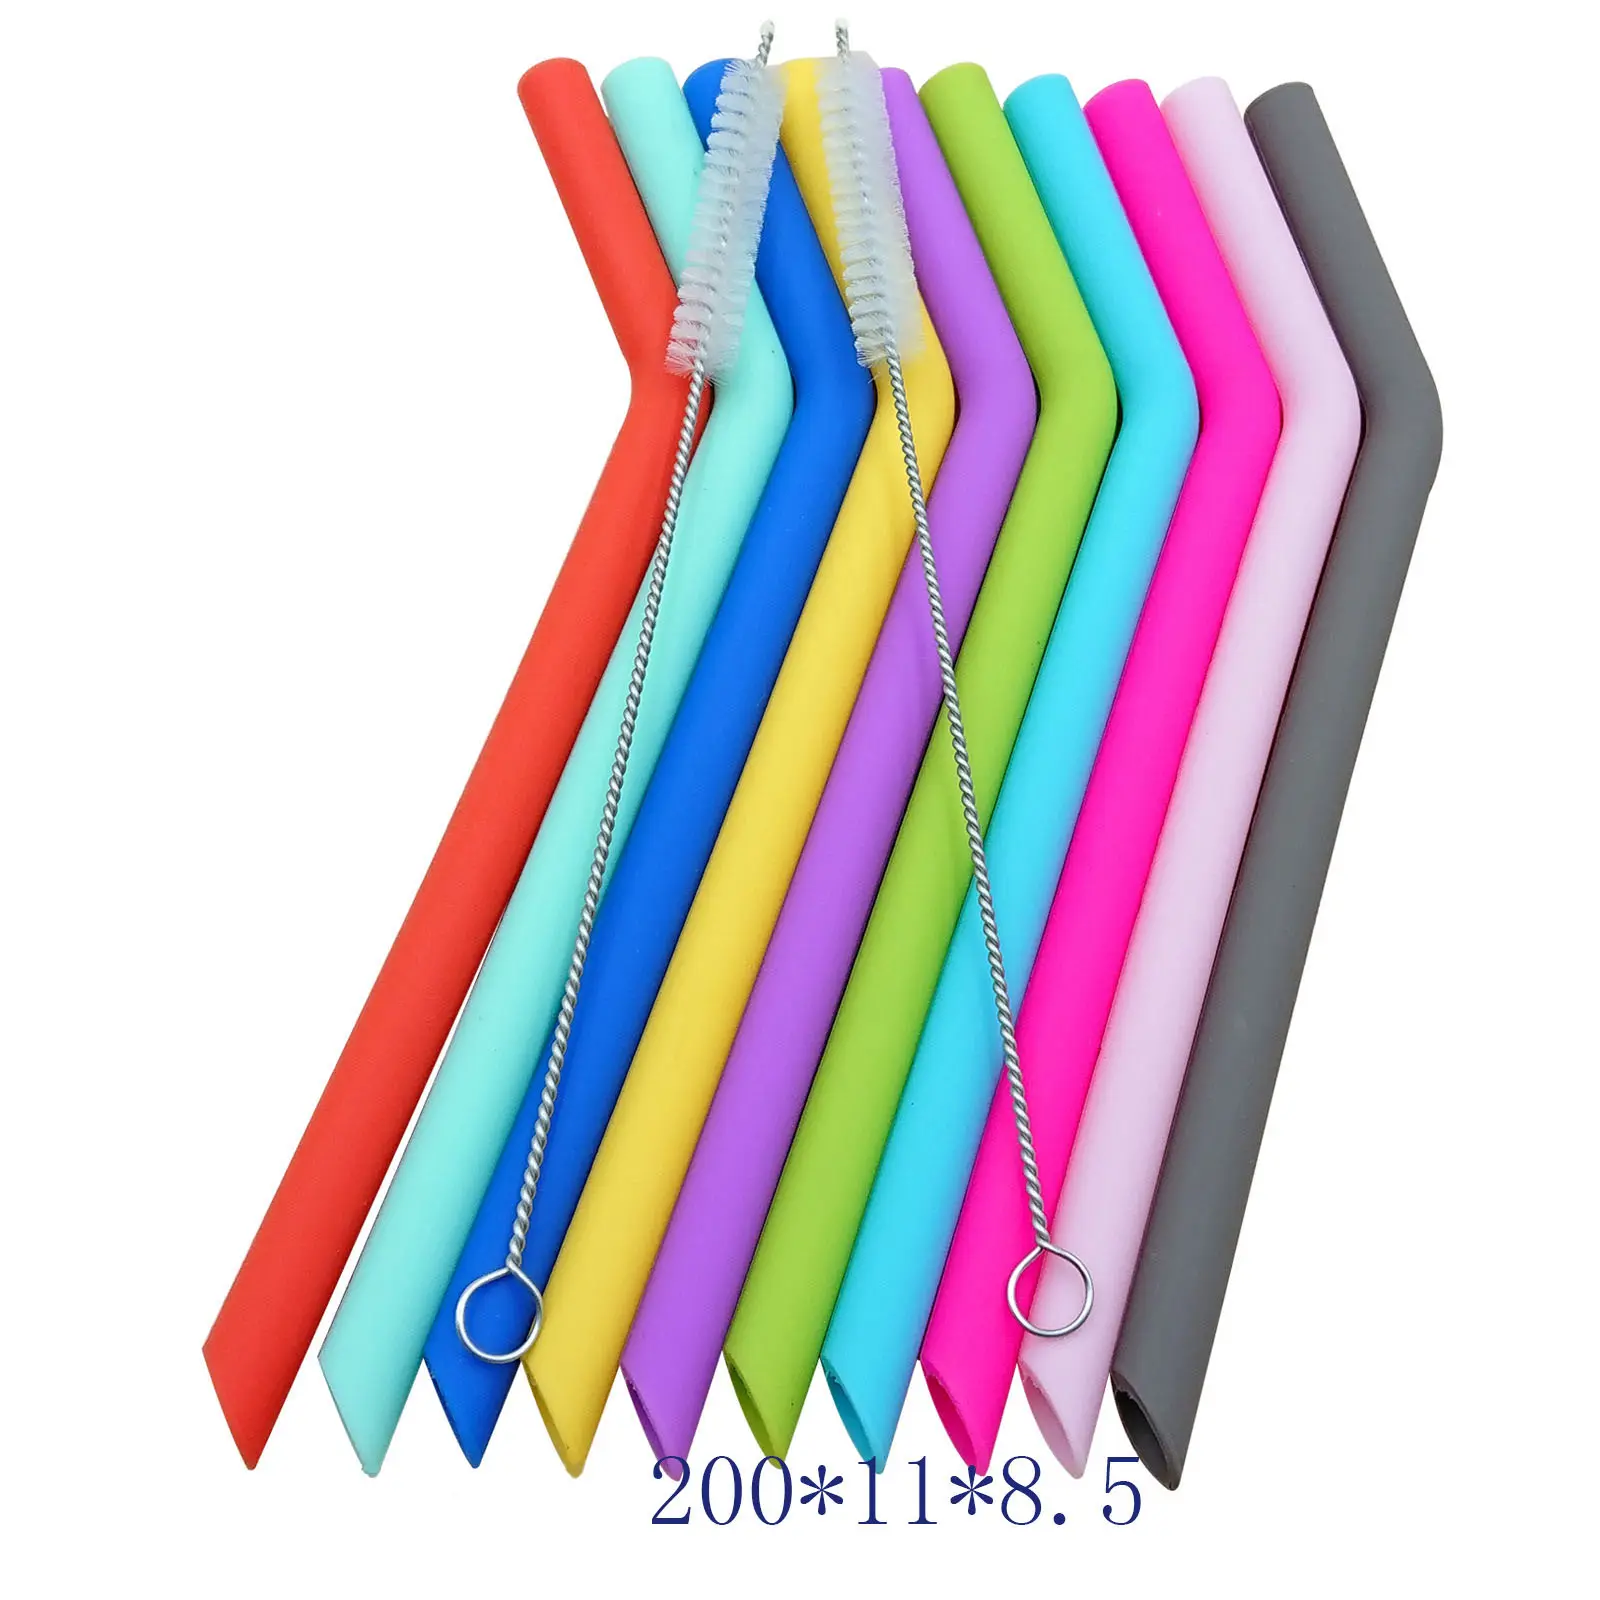 BPA Free Portable Reusable Travel Long Flexible Safety Silicone Drinking Straws for Kids/Toddlers